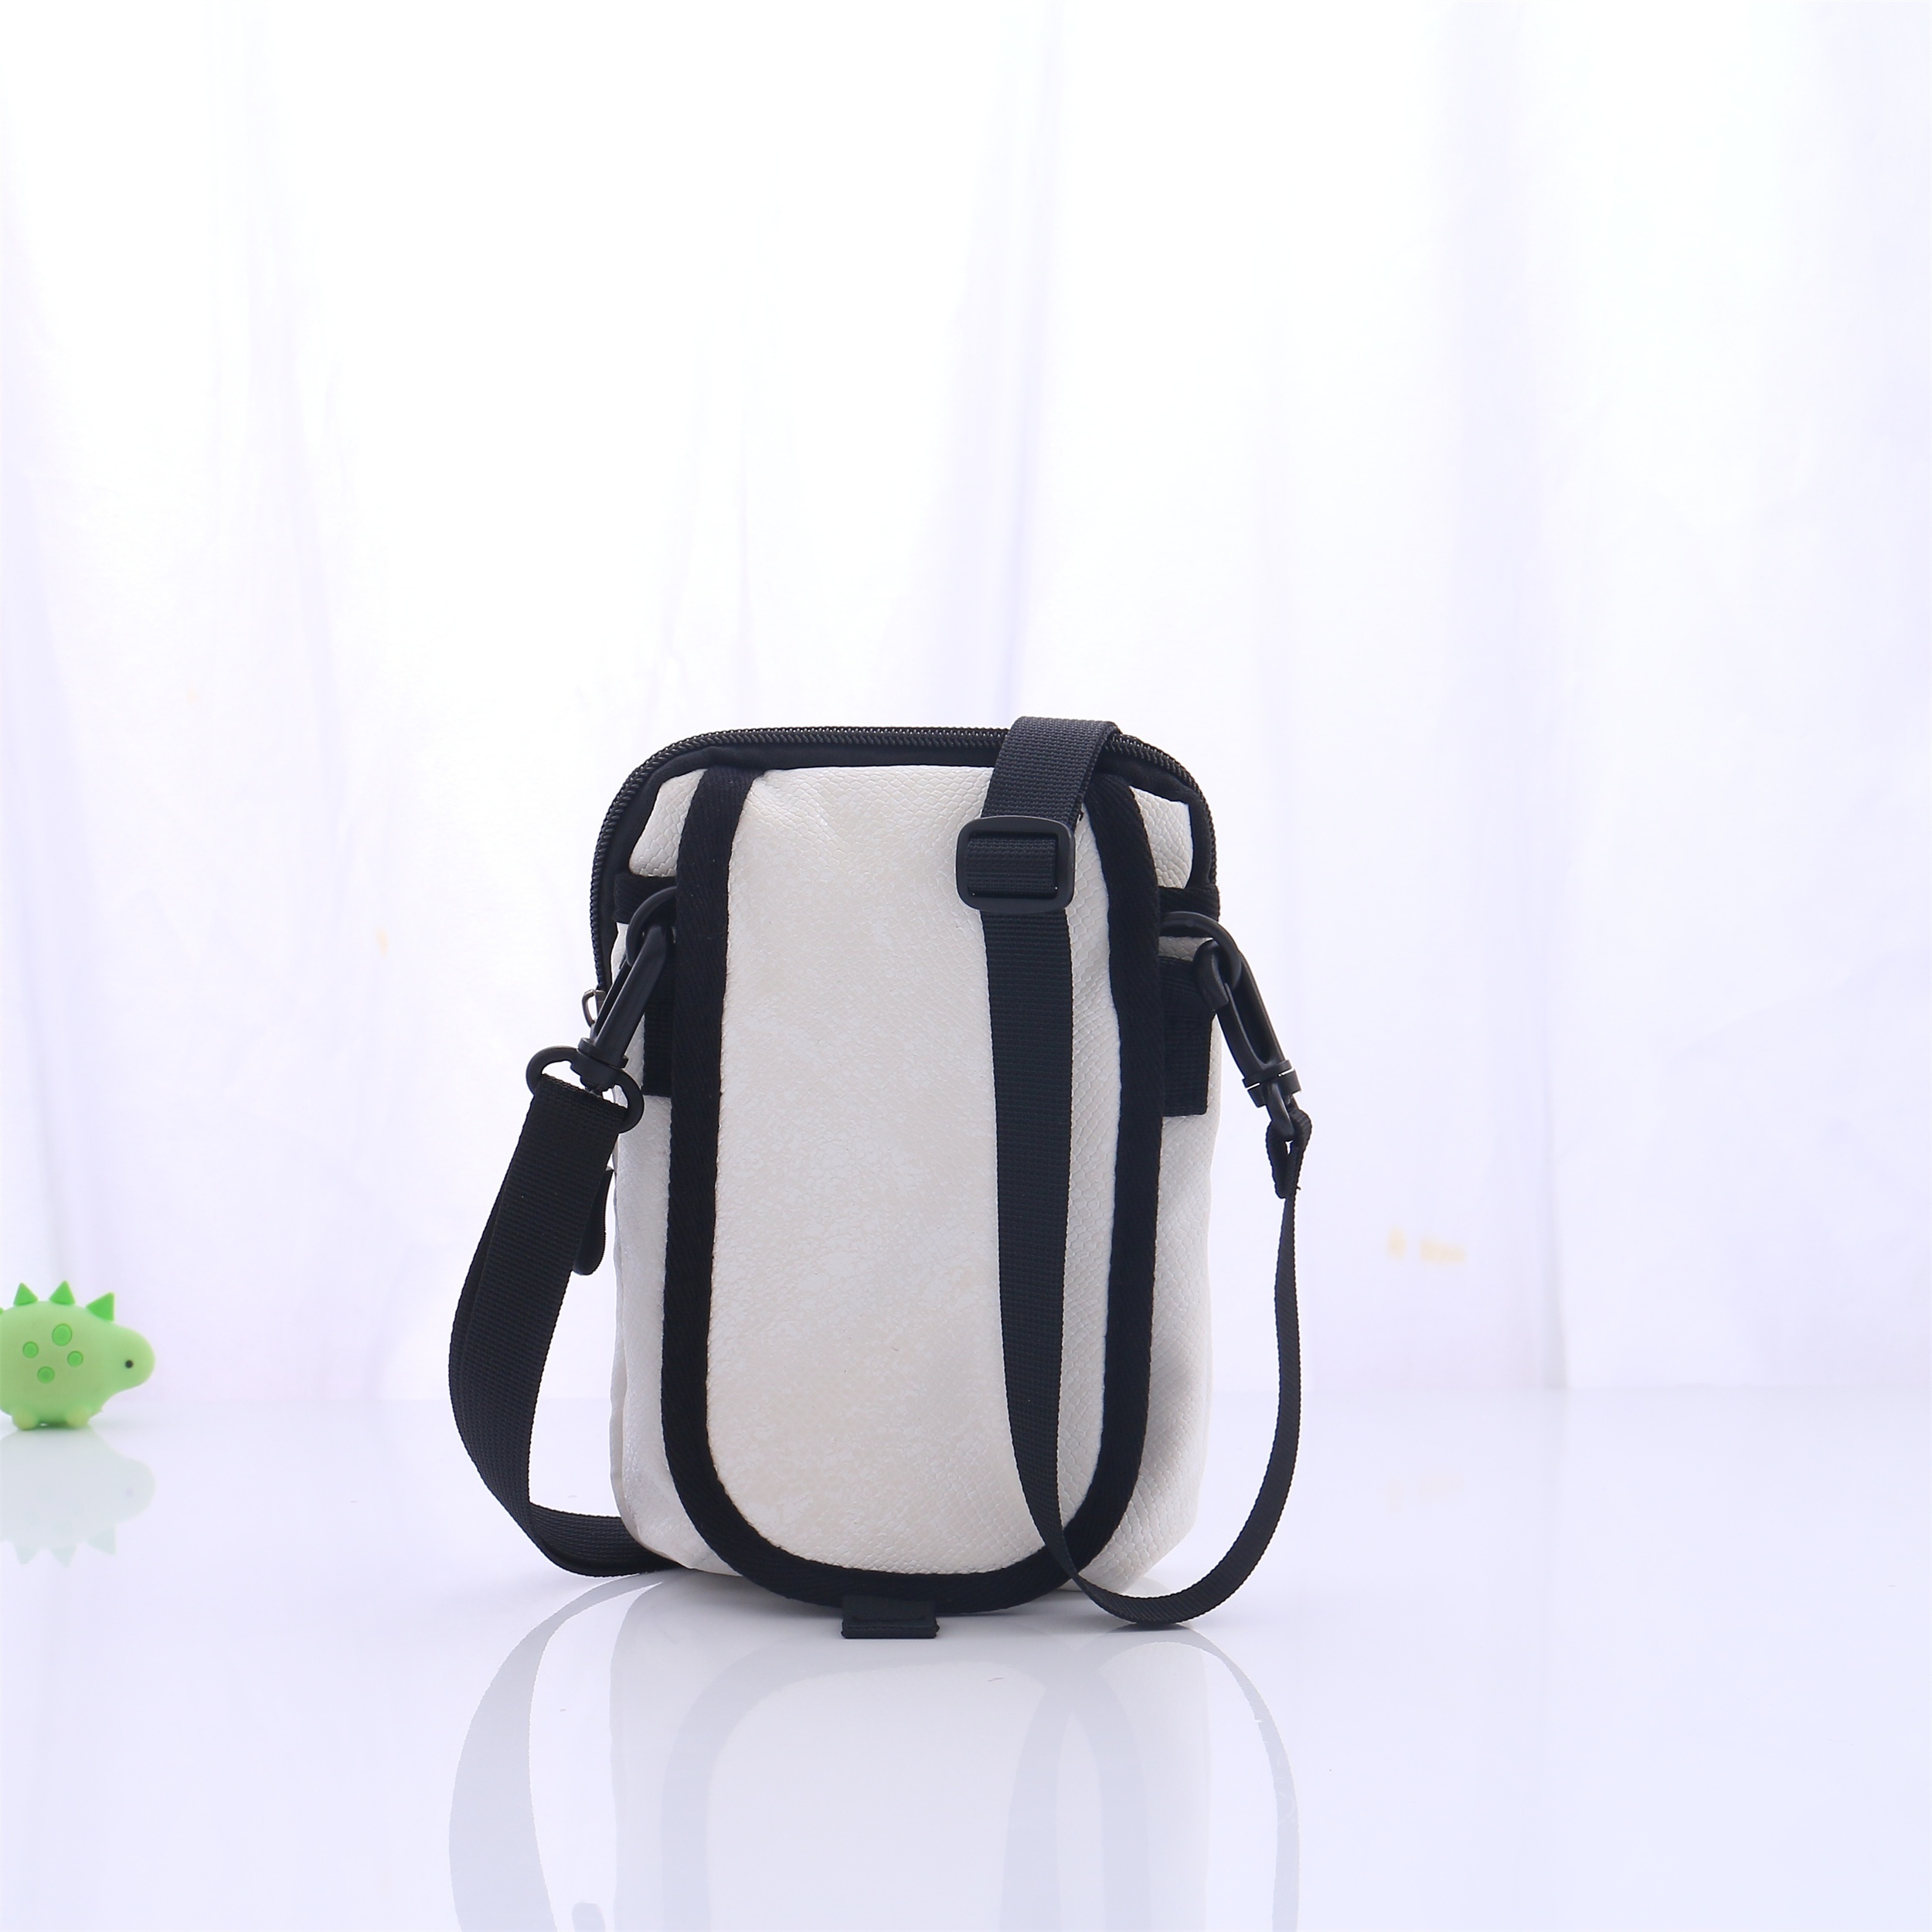 Black Crossbody Sling Bag with Changeable Strap